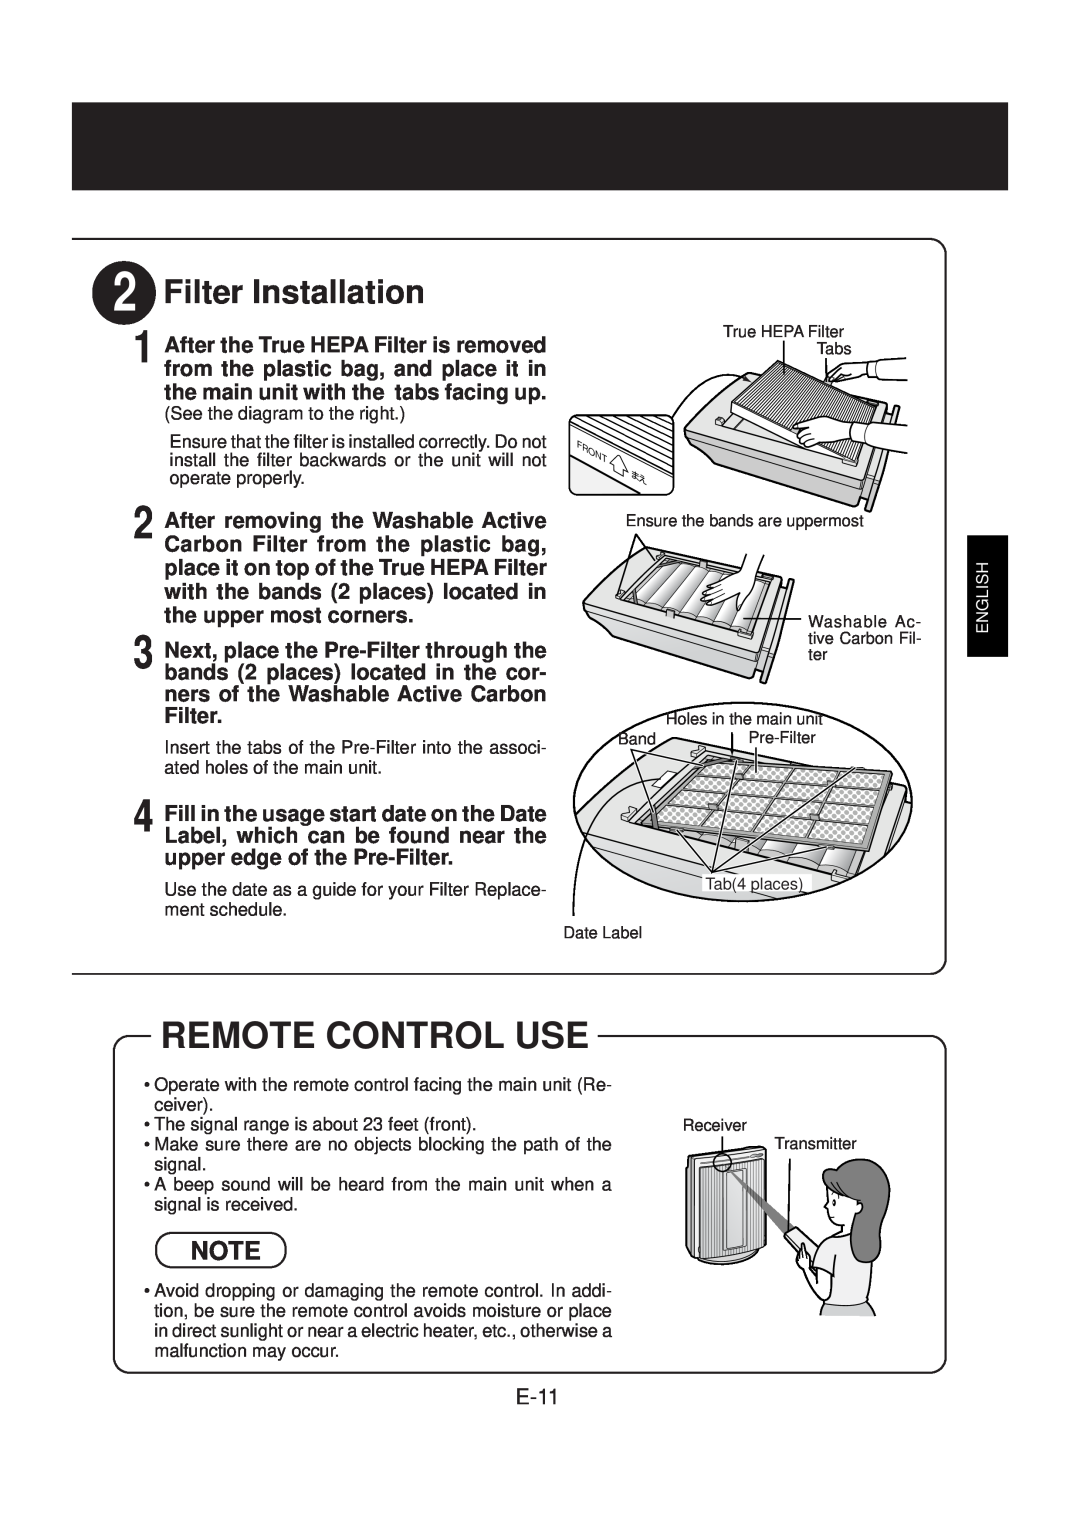 Sharp FP-N40CX operation manual Remote Control Use, Filter Installation, E-11 